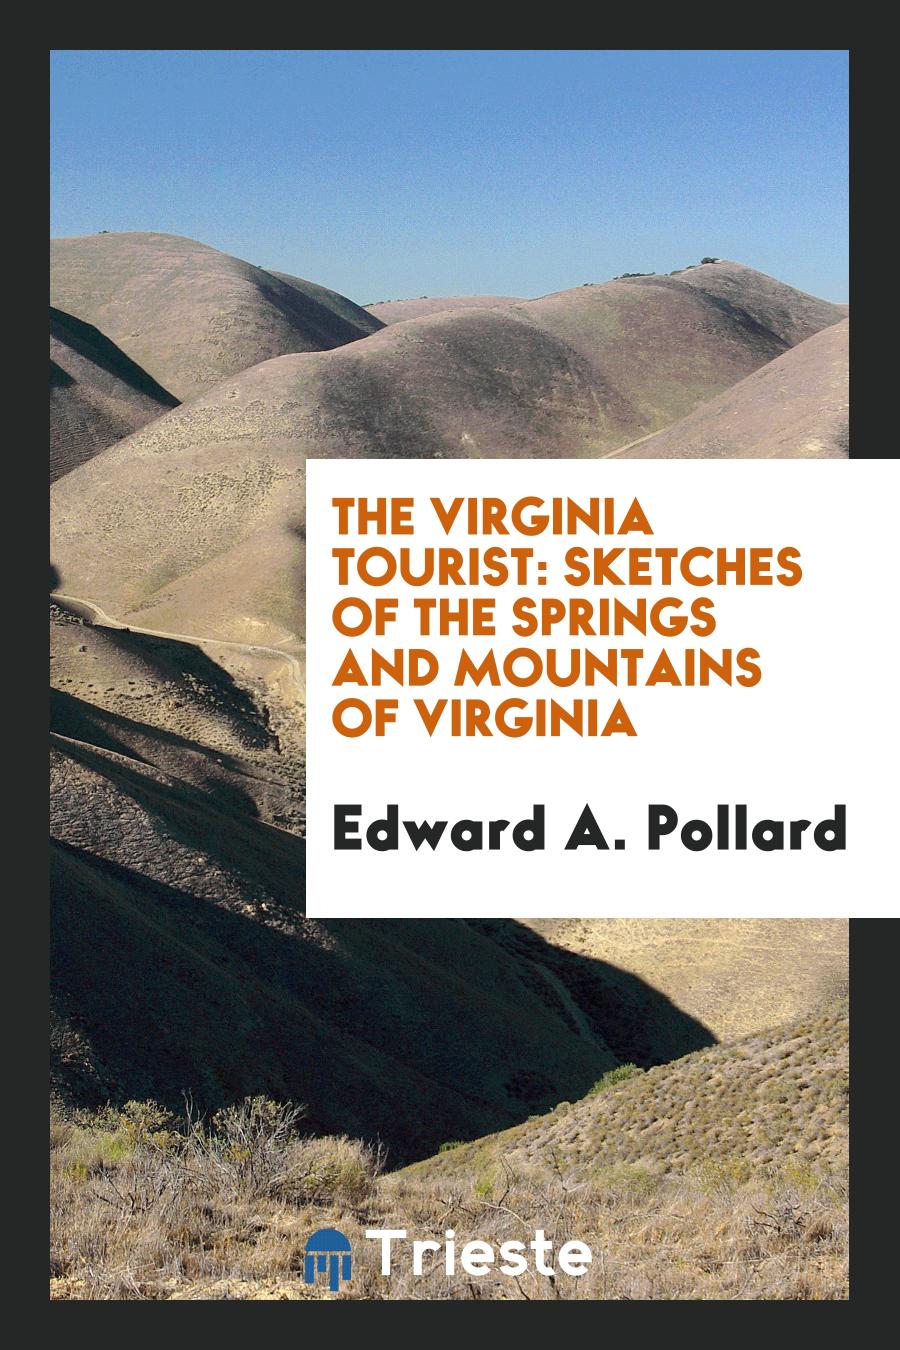 The Virginia Tourist: Sketches of the Springs and Mountains of Virginia